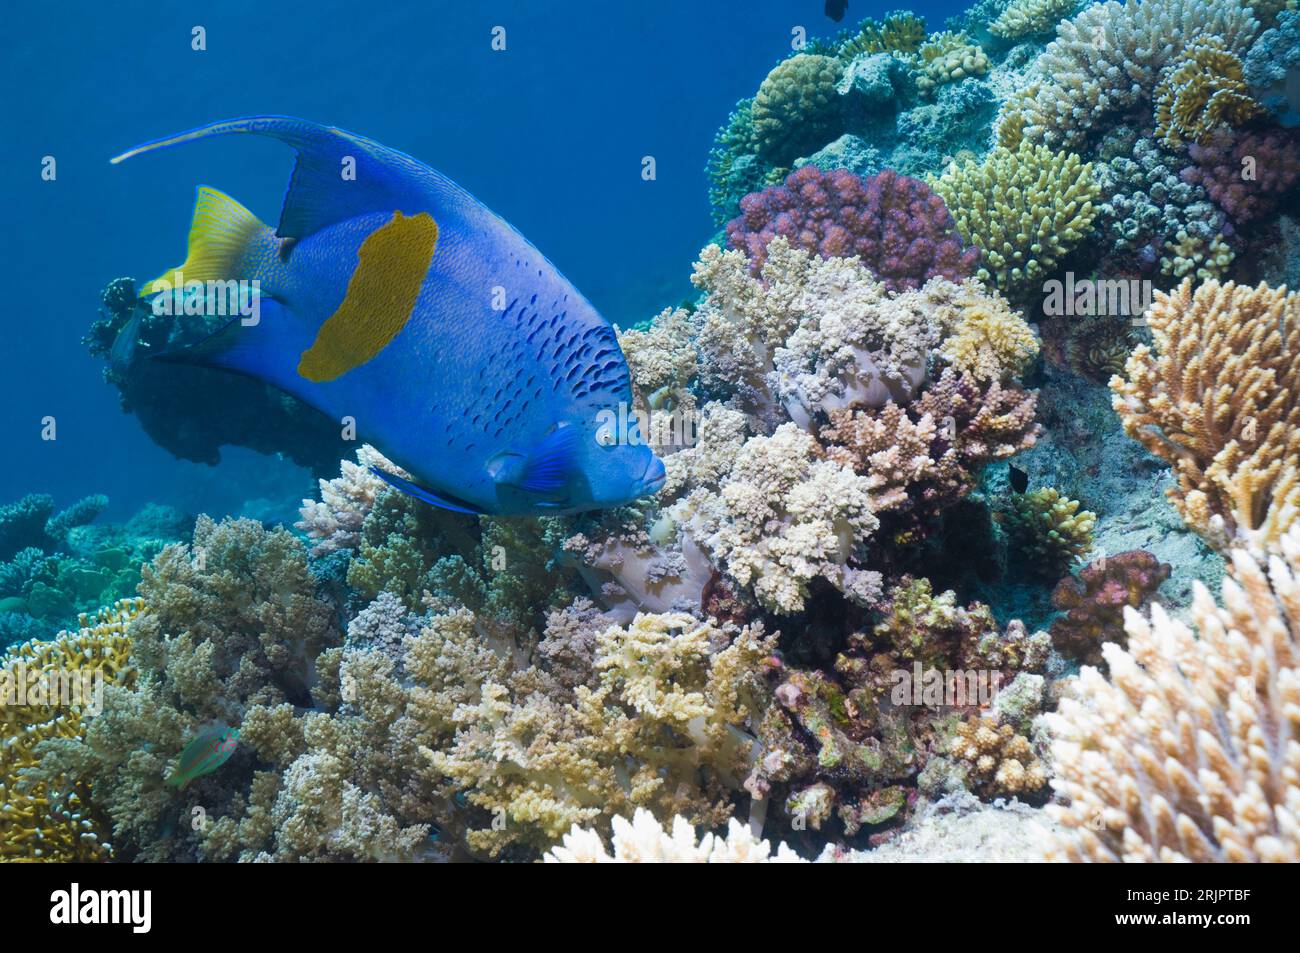 Yellowbar angelfish (Pomacanthus maculosus) swimming over coral reef.  Egypt, Red Sea. Stock Photo